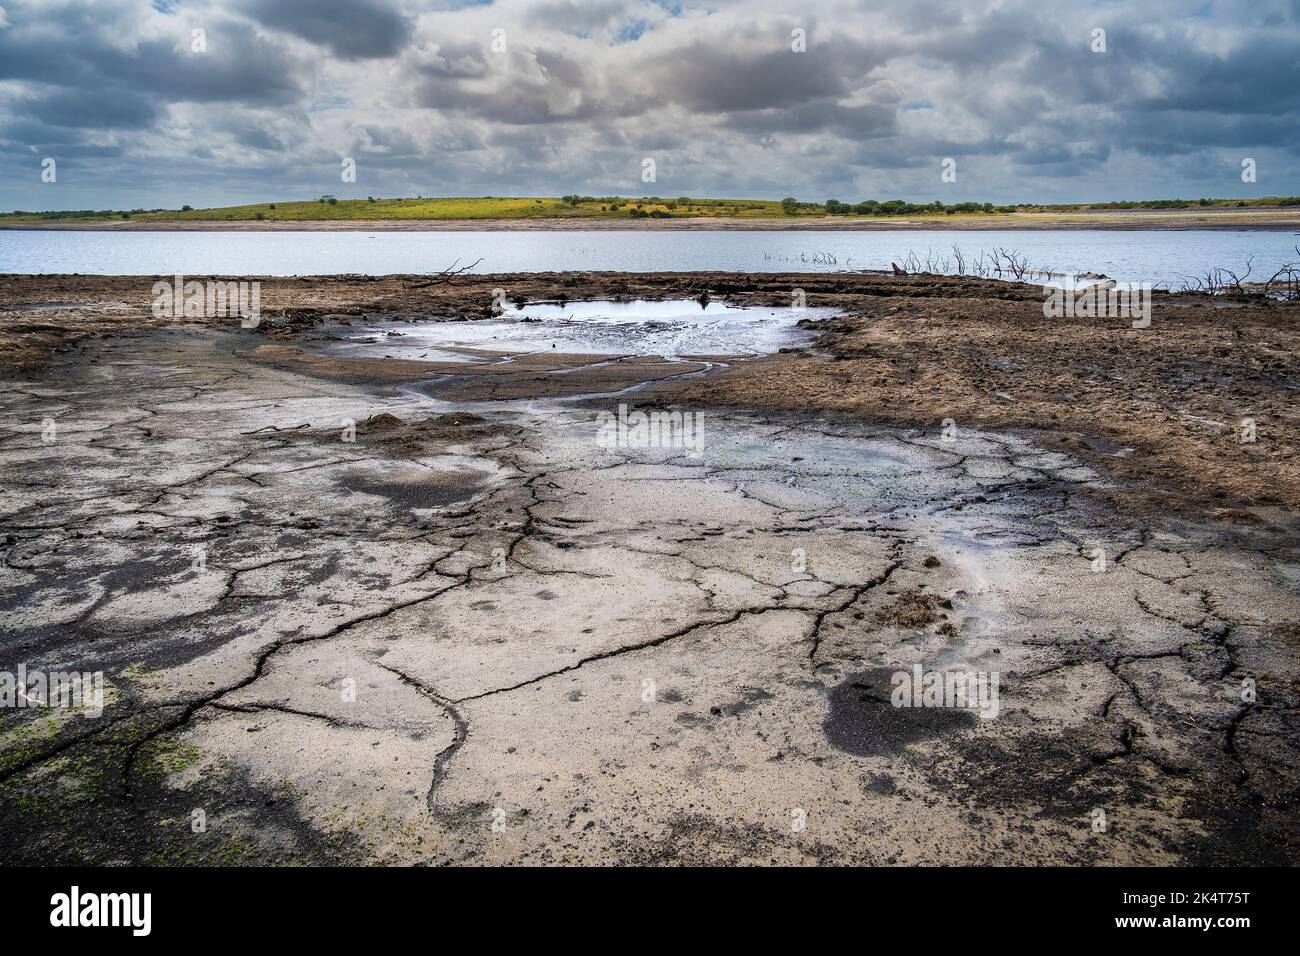 Receding shoreline and parched earth caused by falling water levels caused by severe drought conditions at Colliford Lake Reservoir on Bodmin Moor in Stock Photo